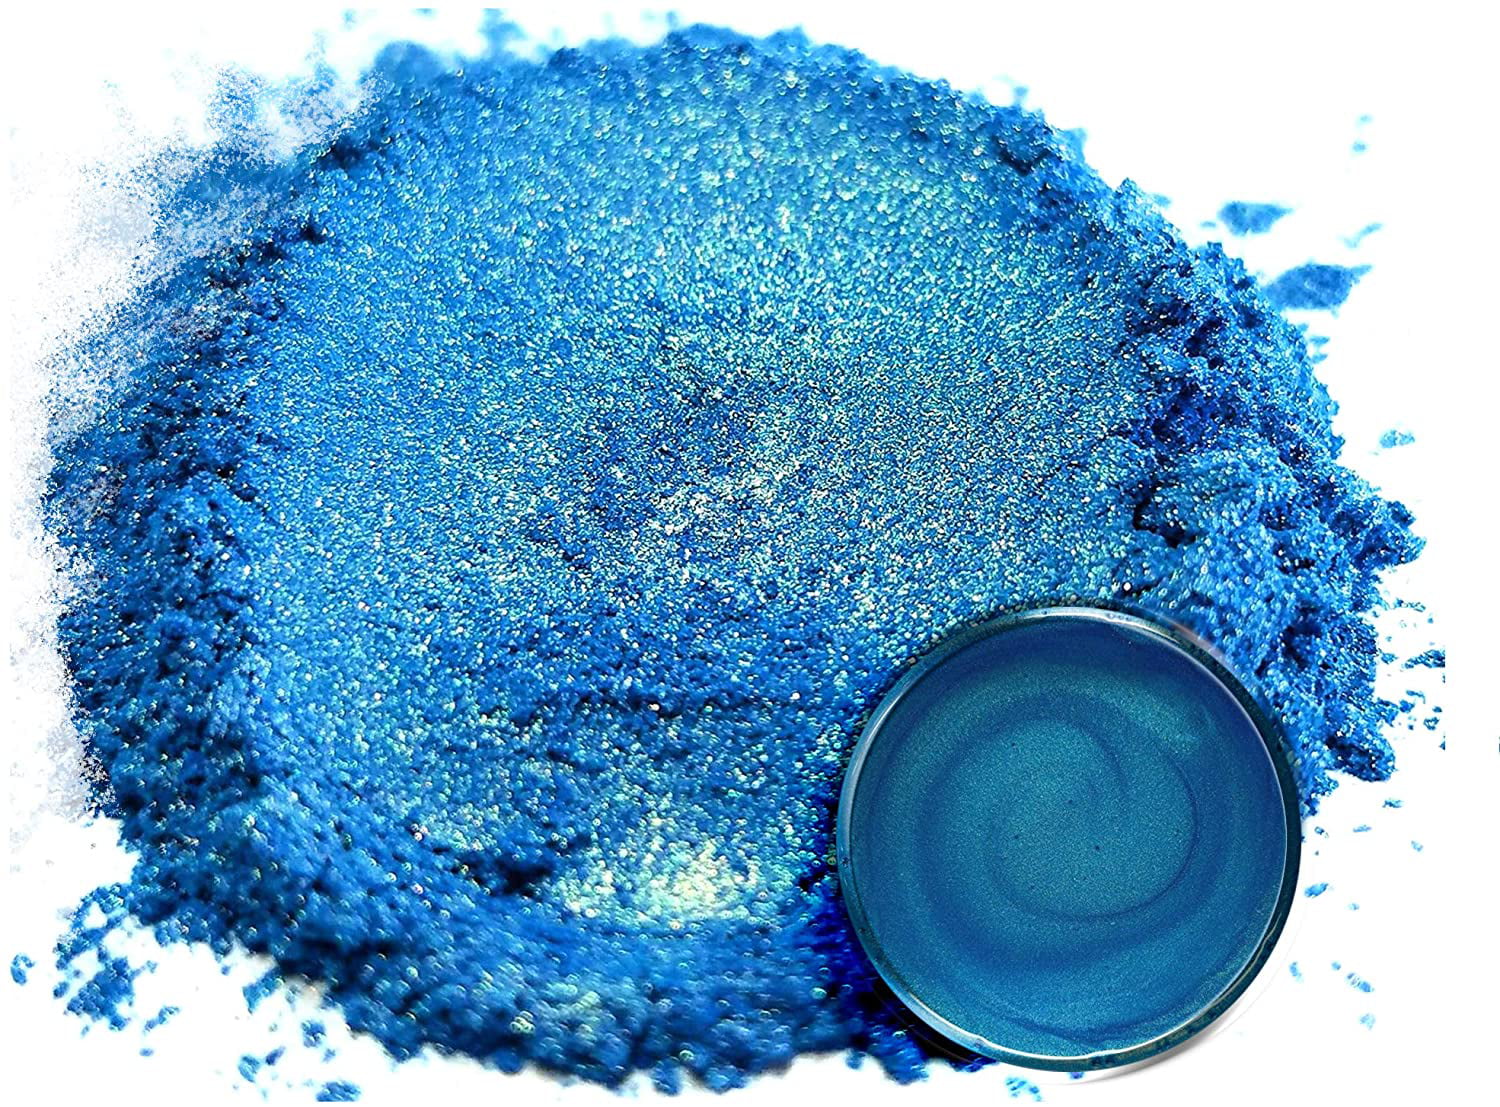 Resinart Mica Powder (320g) - 32 Colors/10g Each - 2 Glow in The Dark - for DIY Resin Epoxy, Cosmetics, Bath Bombs, Soap Making, etc.